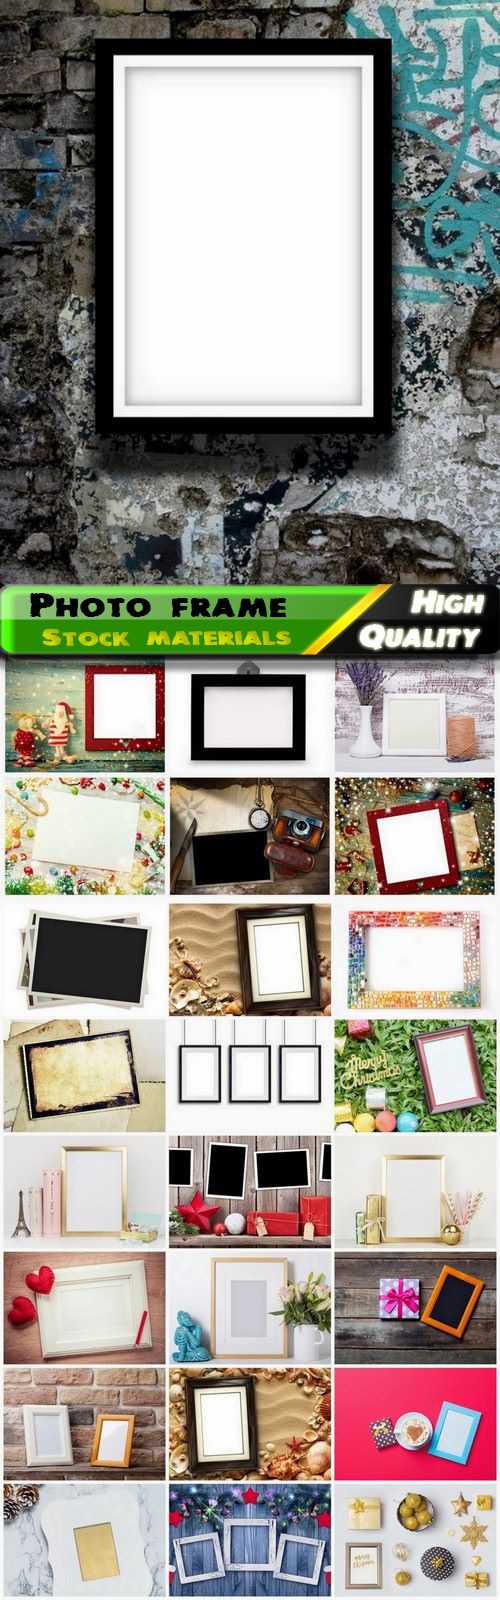 Photo frame with creative scenery for your images 25 HQ Jpg